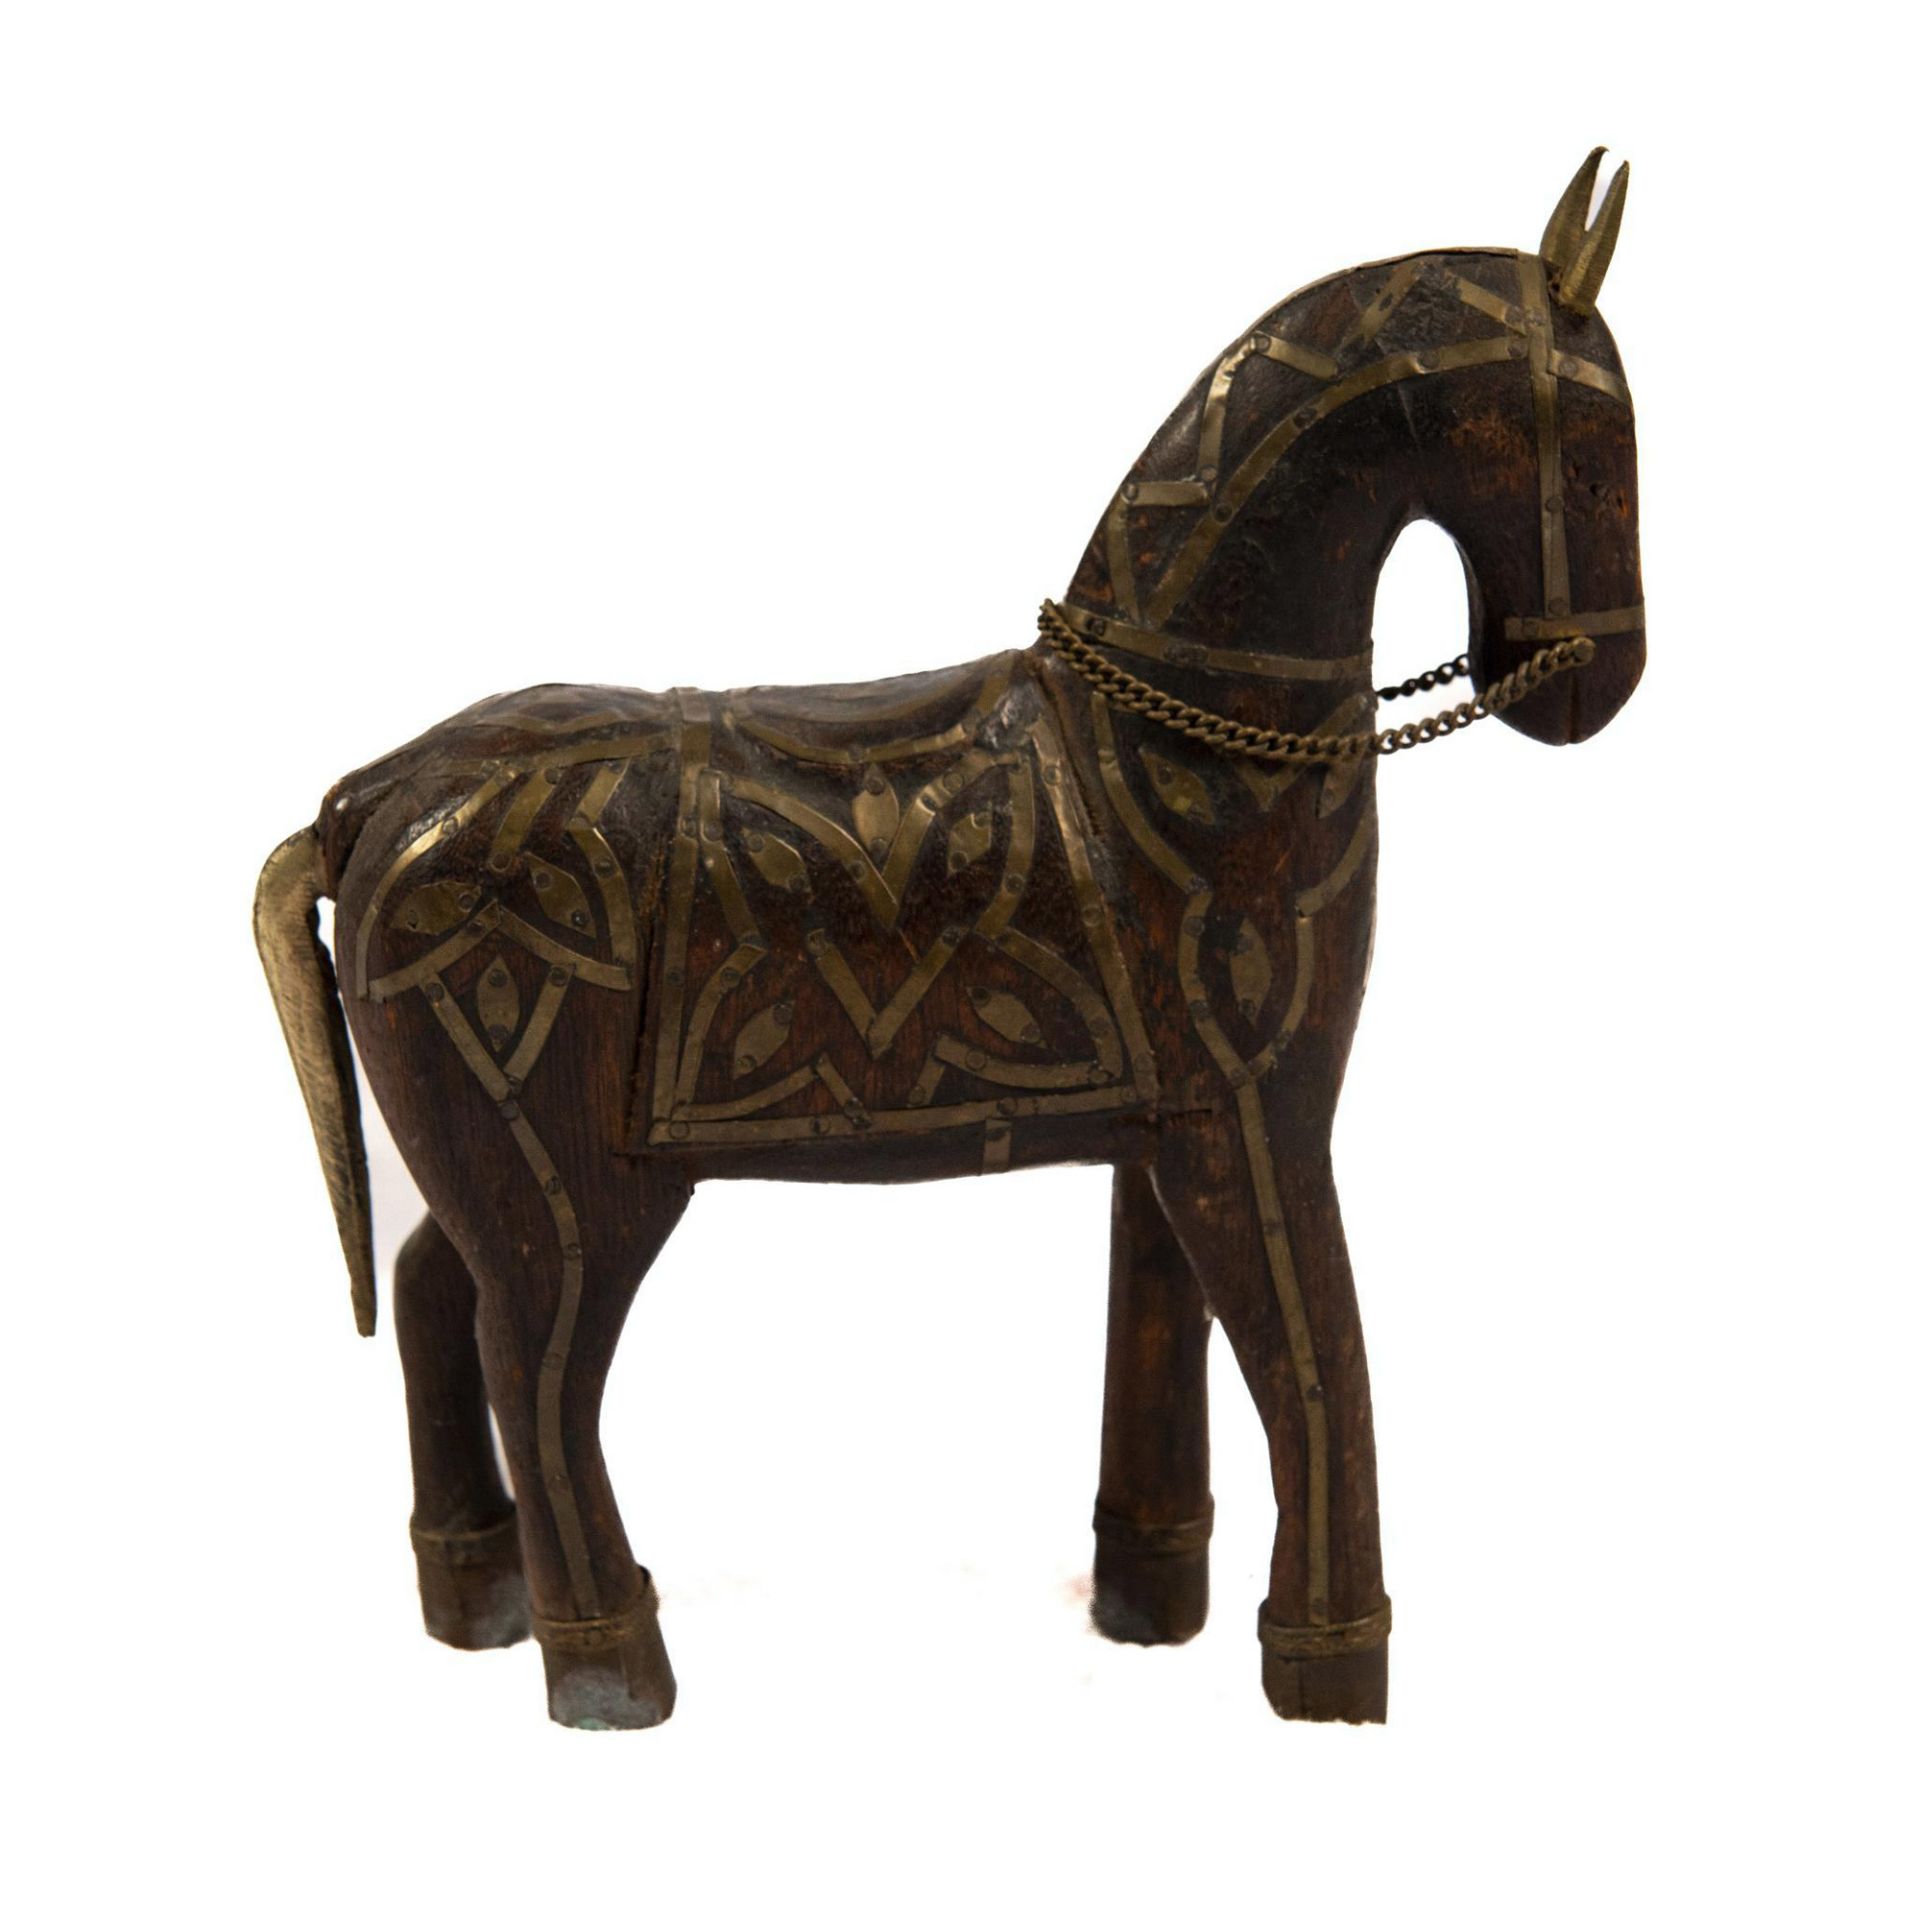 Rajasthani Indian Wooden War Horse, Brass Inlay - Image 3 of 4